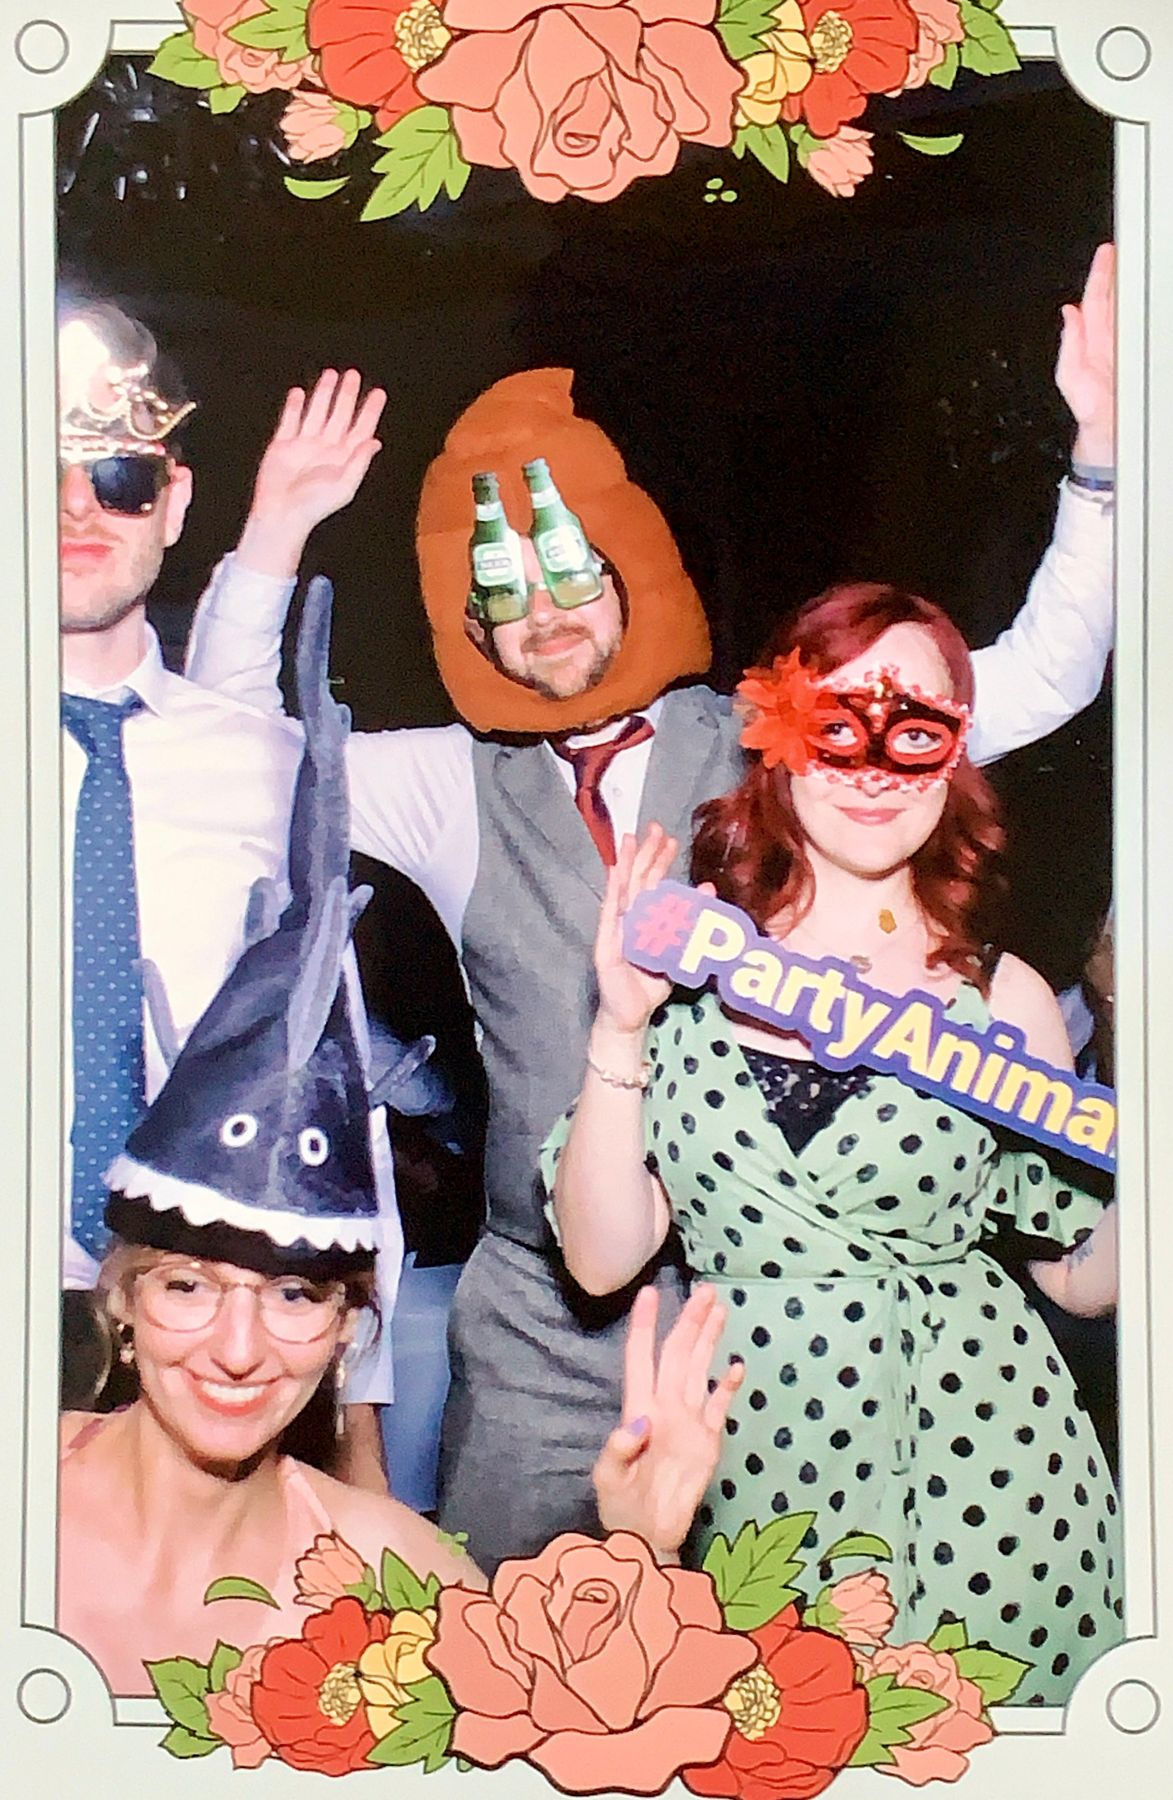 Me, Charlotte, Jenn, and Chris in a photo booth. I'm wearing a poop-shaped hat and beer glasses, Chris is wearing a tiara, Jenn is wearing a mask, and Charlotte has a shark hat on